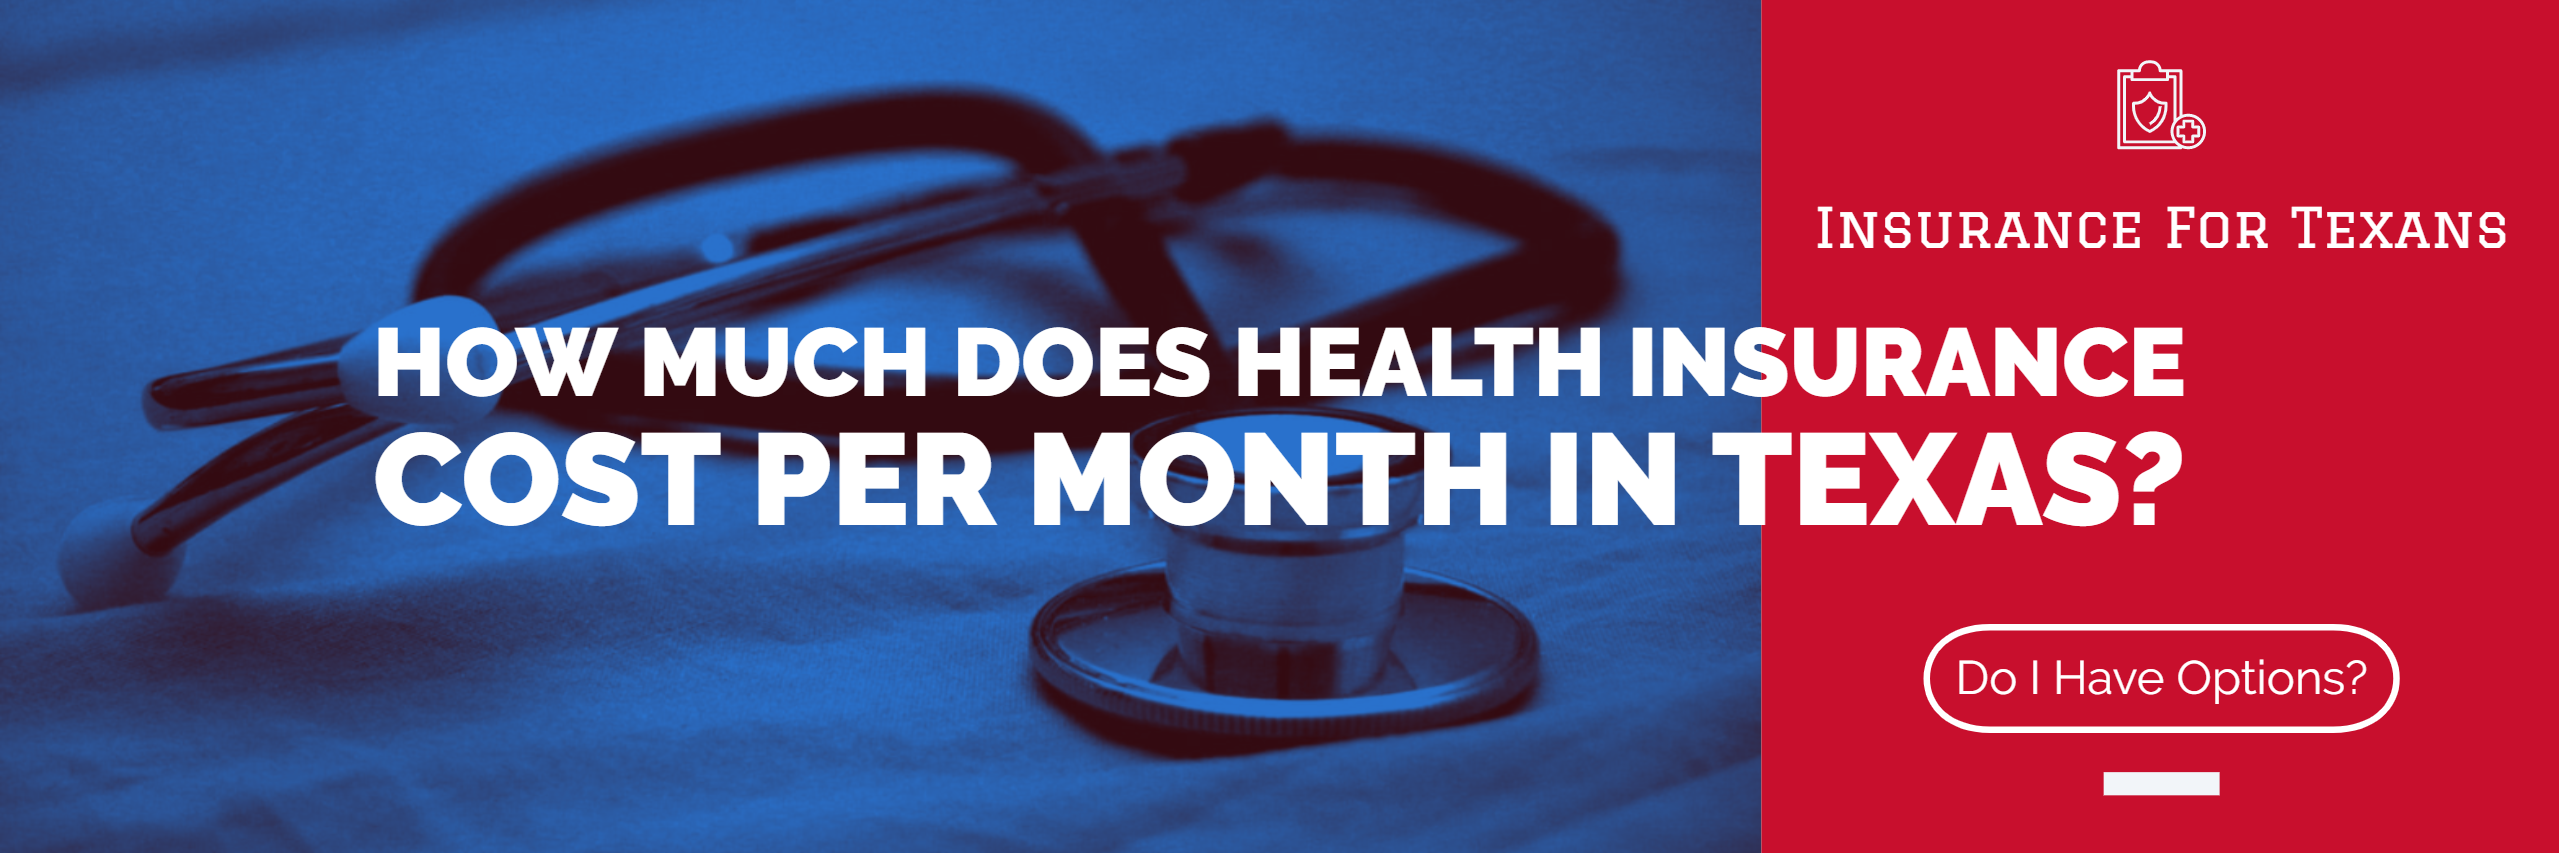 How Much Does Health Insurance Cost Per Month In Texas